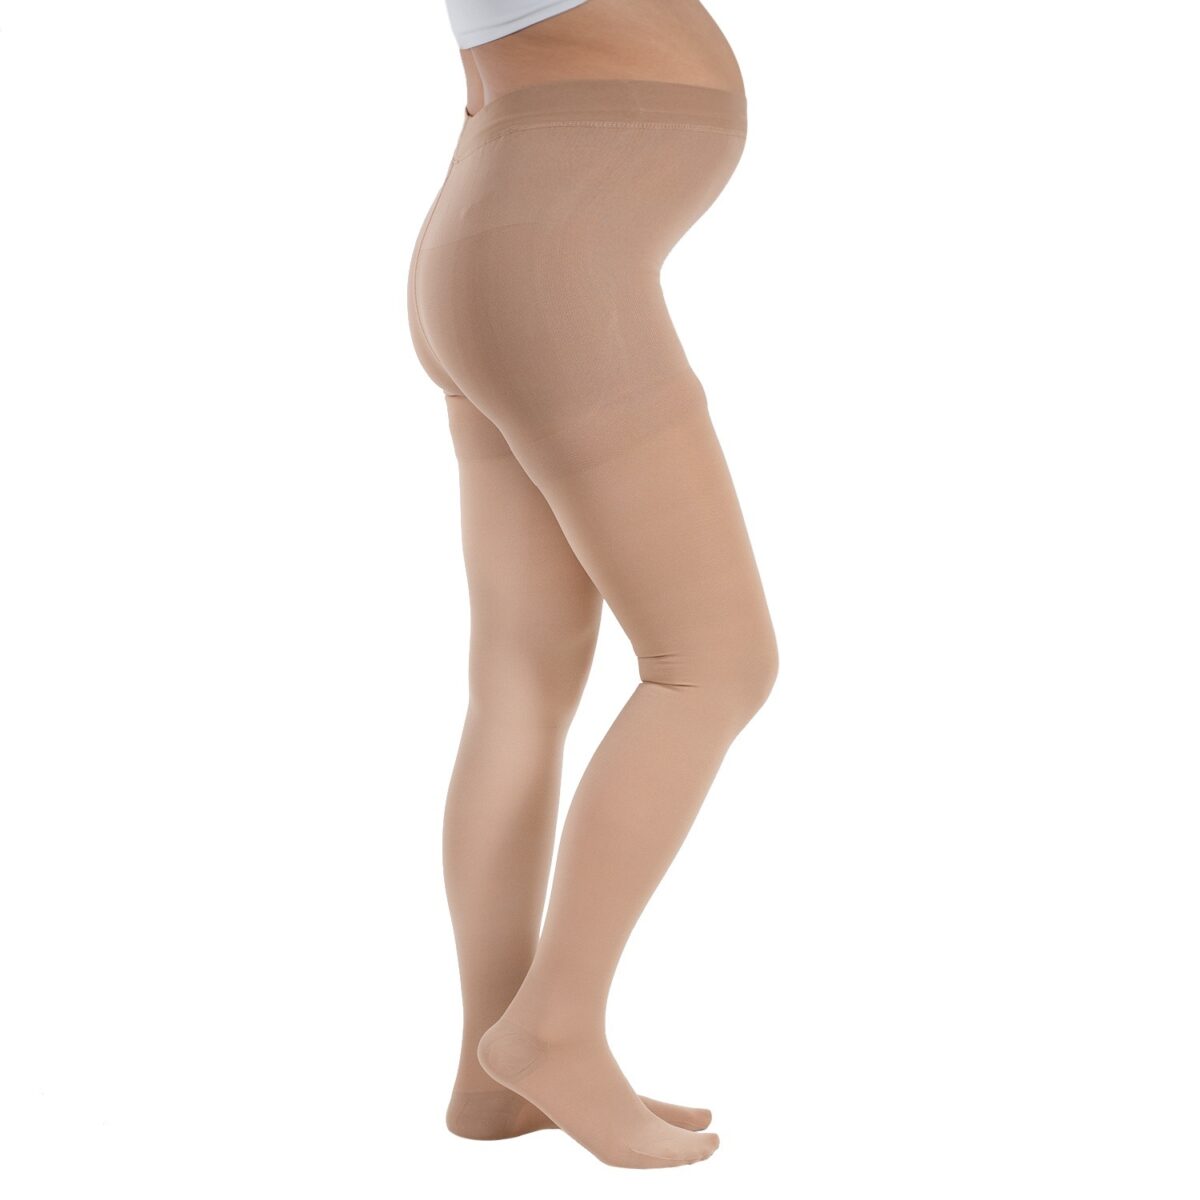 wingmed orthopedic products compression stockings W1313 Pregnant Pantyhose Stockings Closed Toe